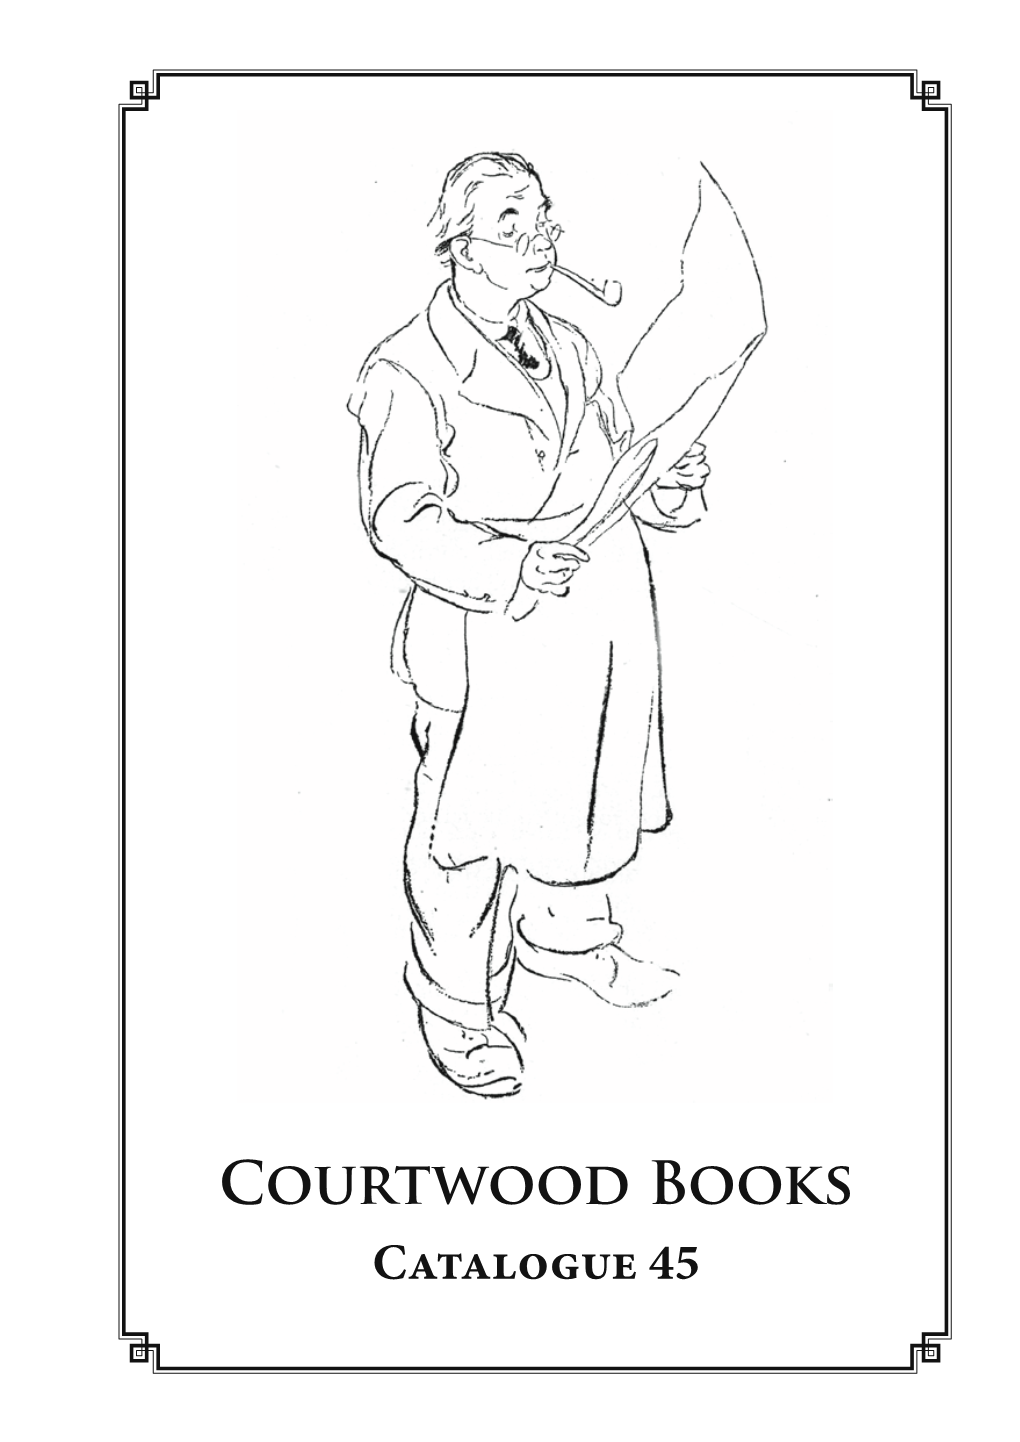 Catalogue 45 Courtwood Books Catalogue 45 C OURTWOOD B OOKS